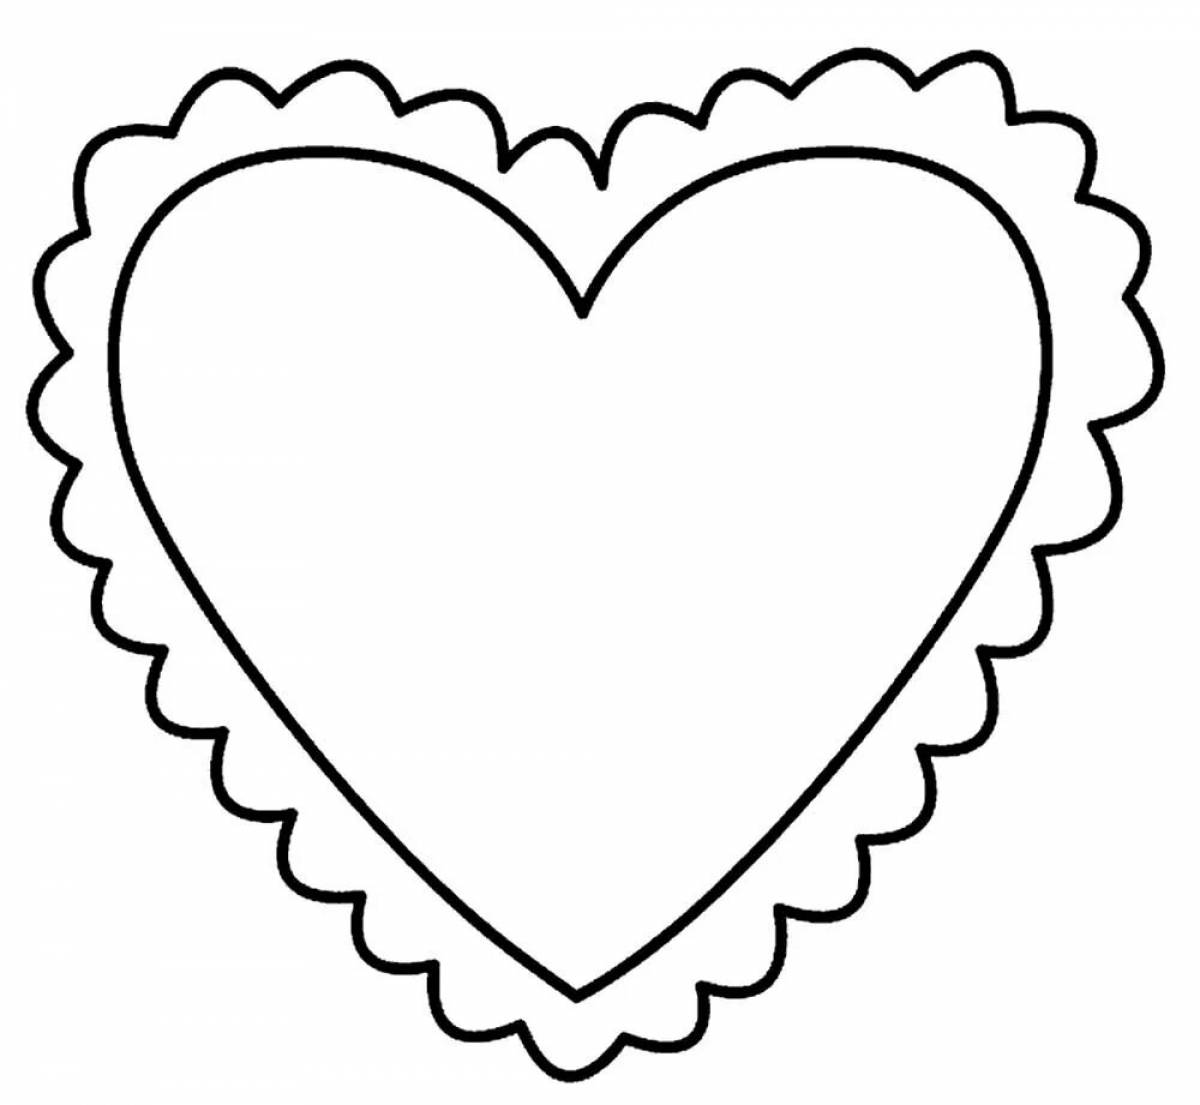 Innovative heart coloring page for 3-4 year olds